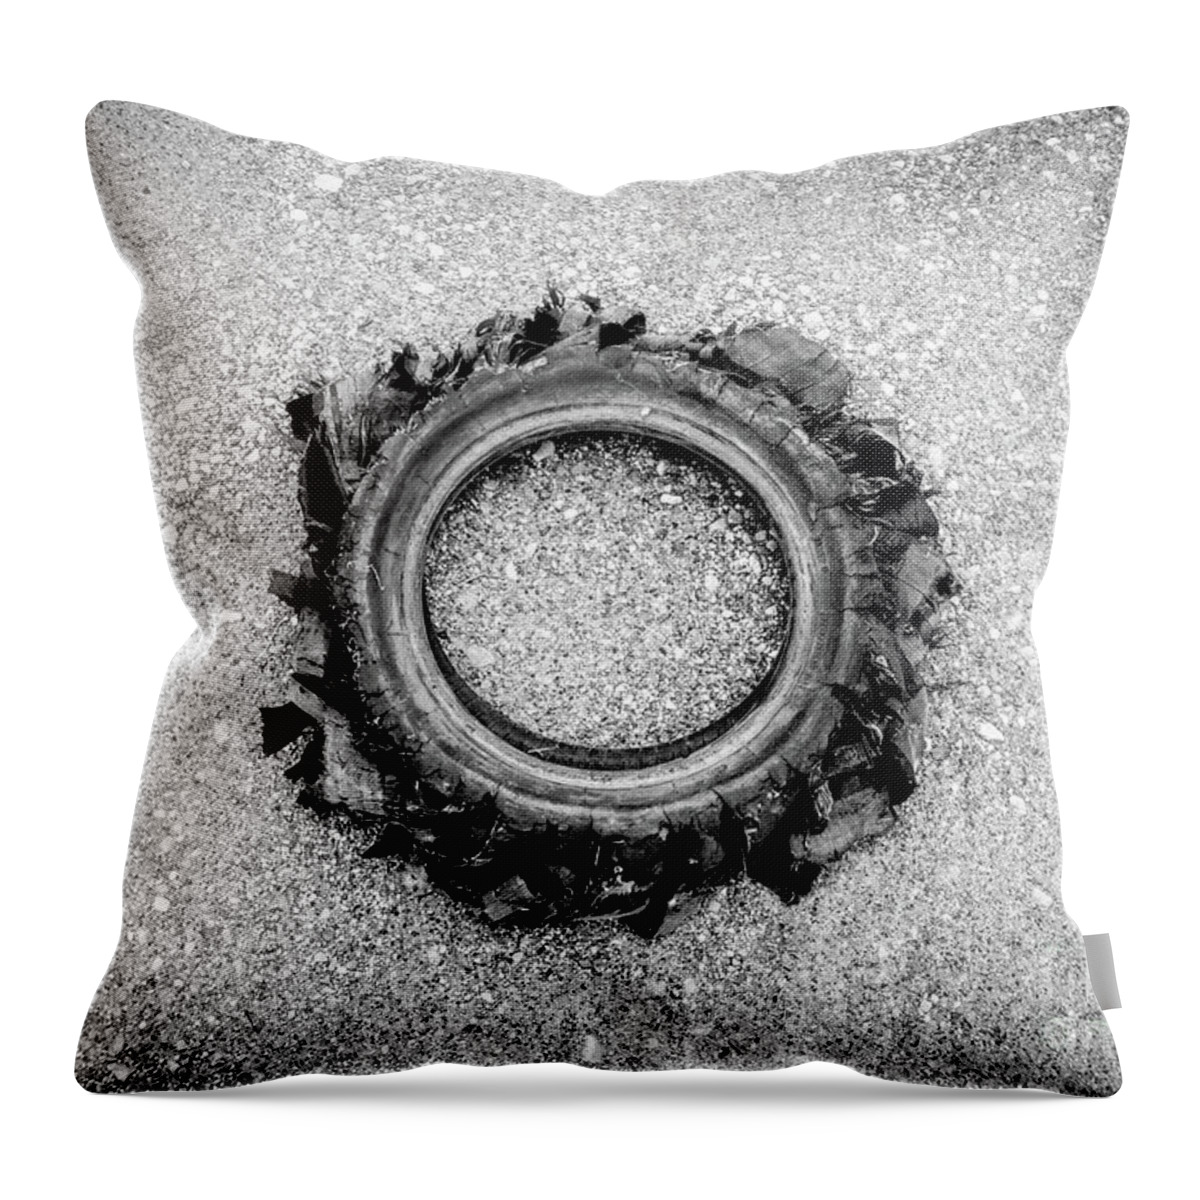 Blown Throw Pillow featuring the photograph Flat Tire BW by Troy Stapek